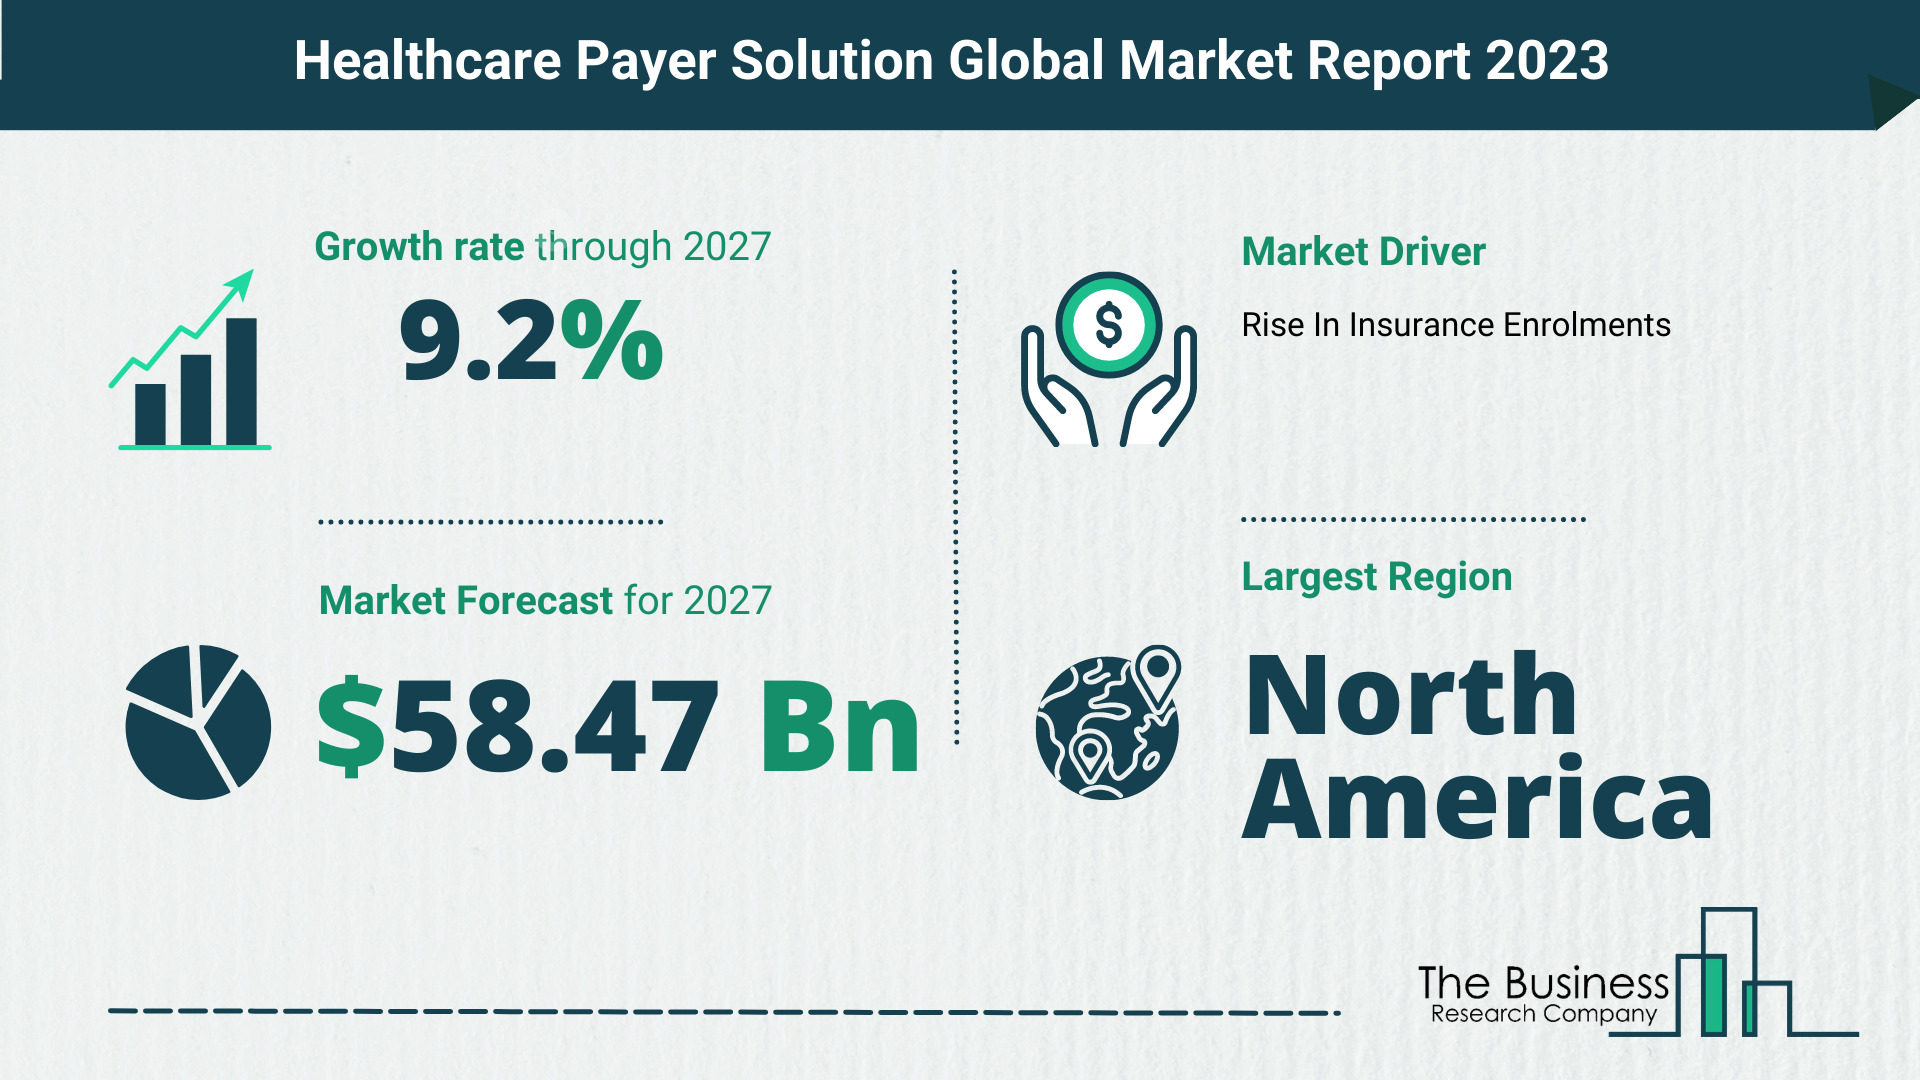 Global Healthcare Payer Solution Market